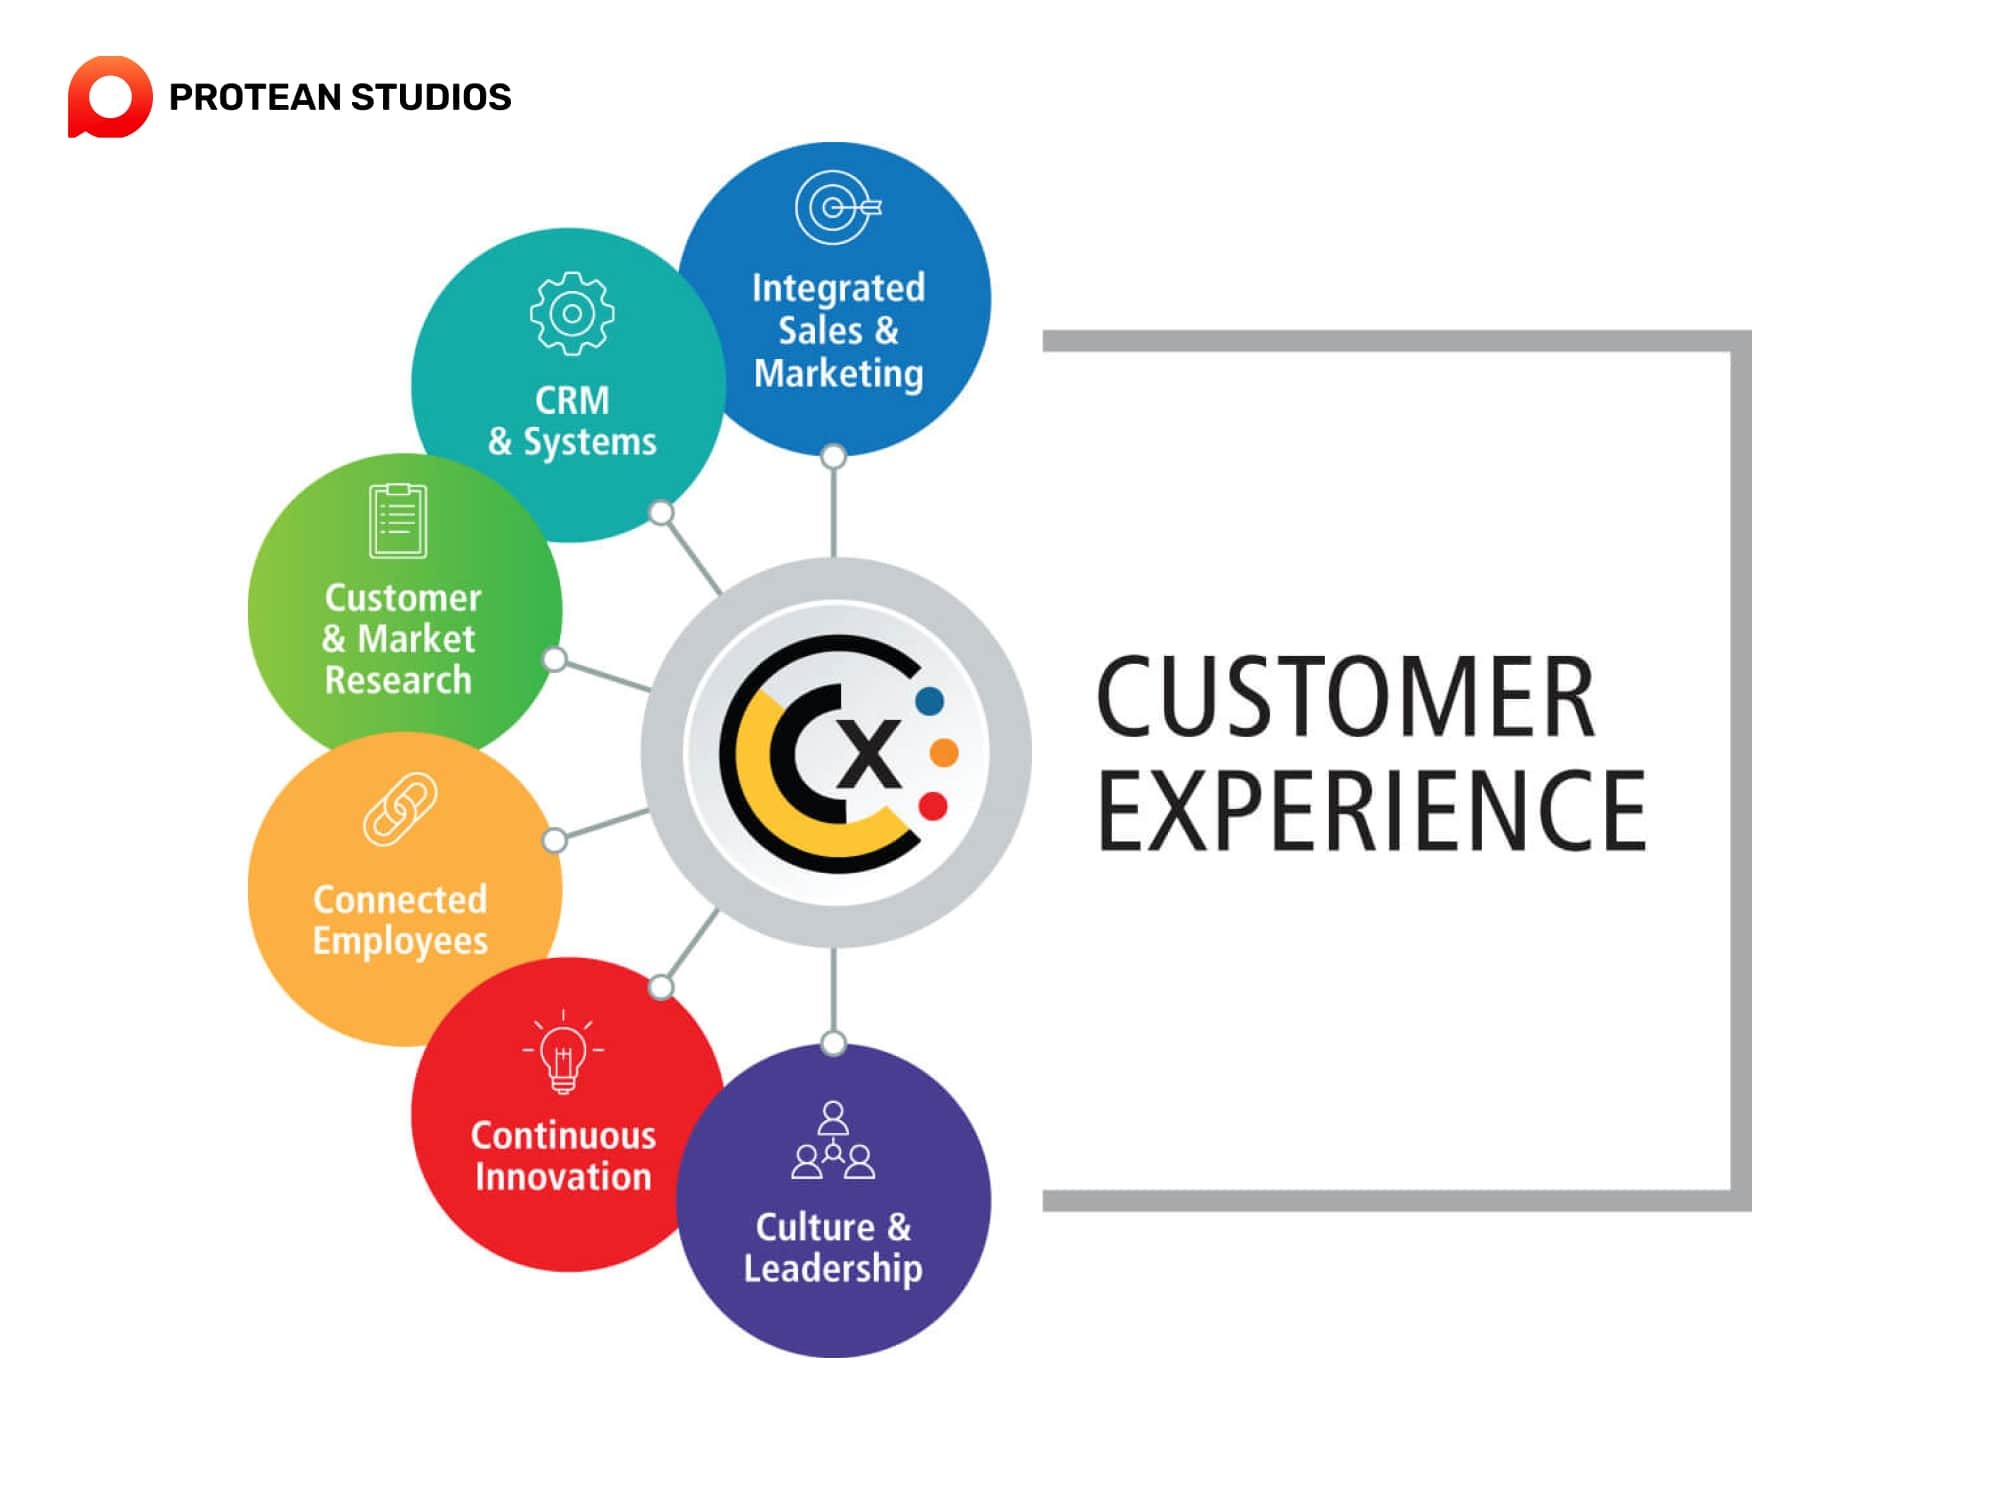 Businesses need to provide a good customer experience to keep them